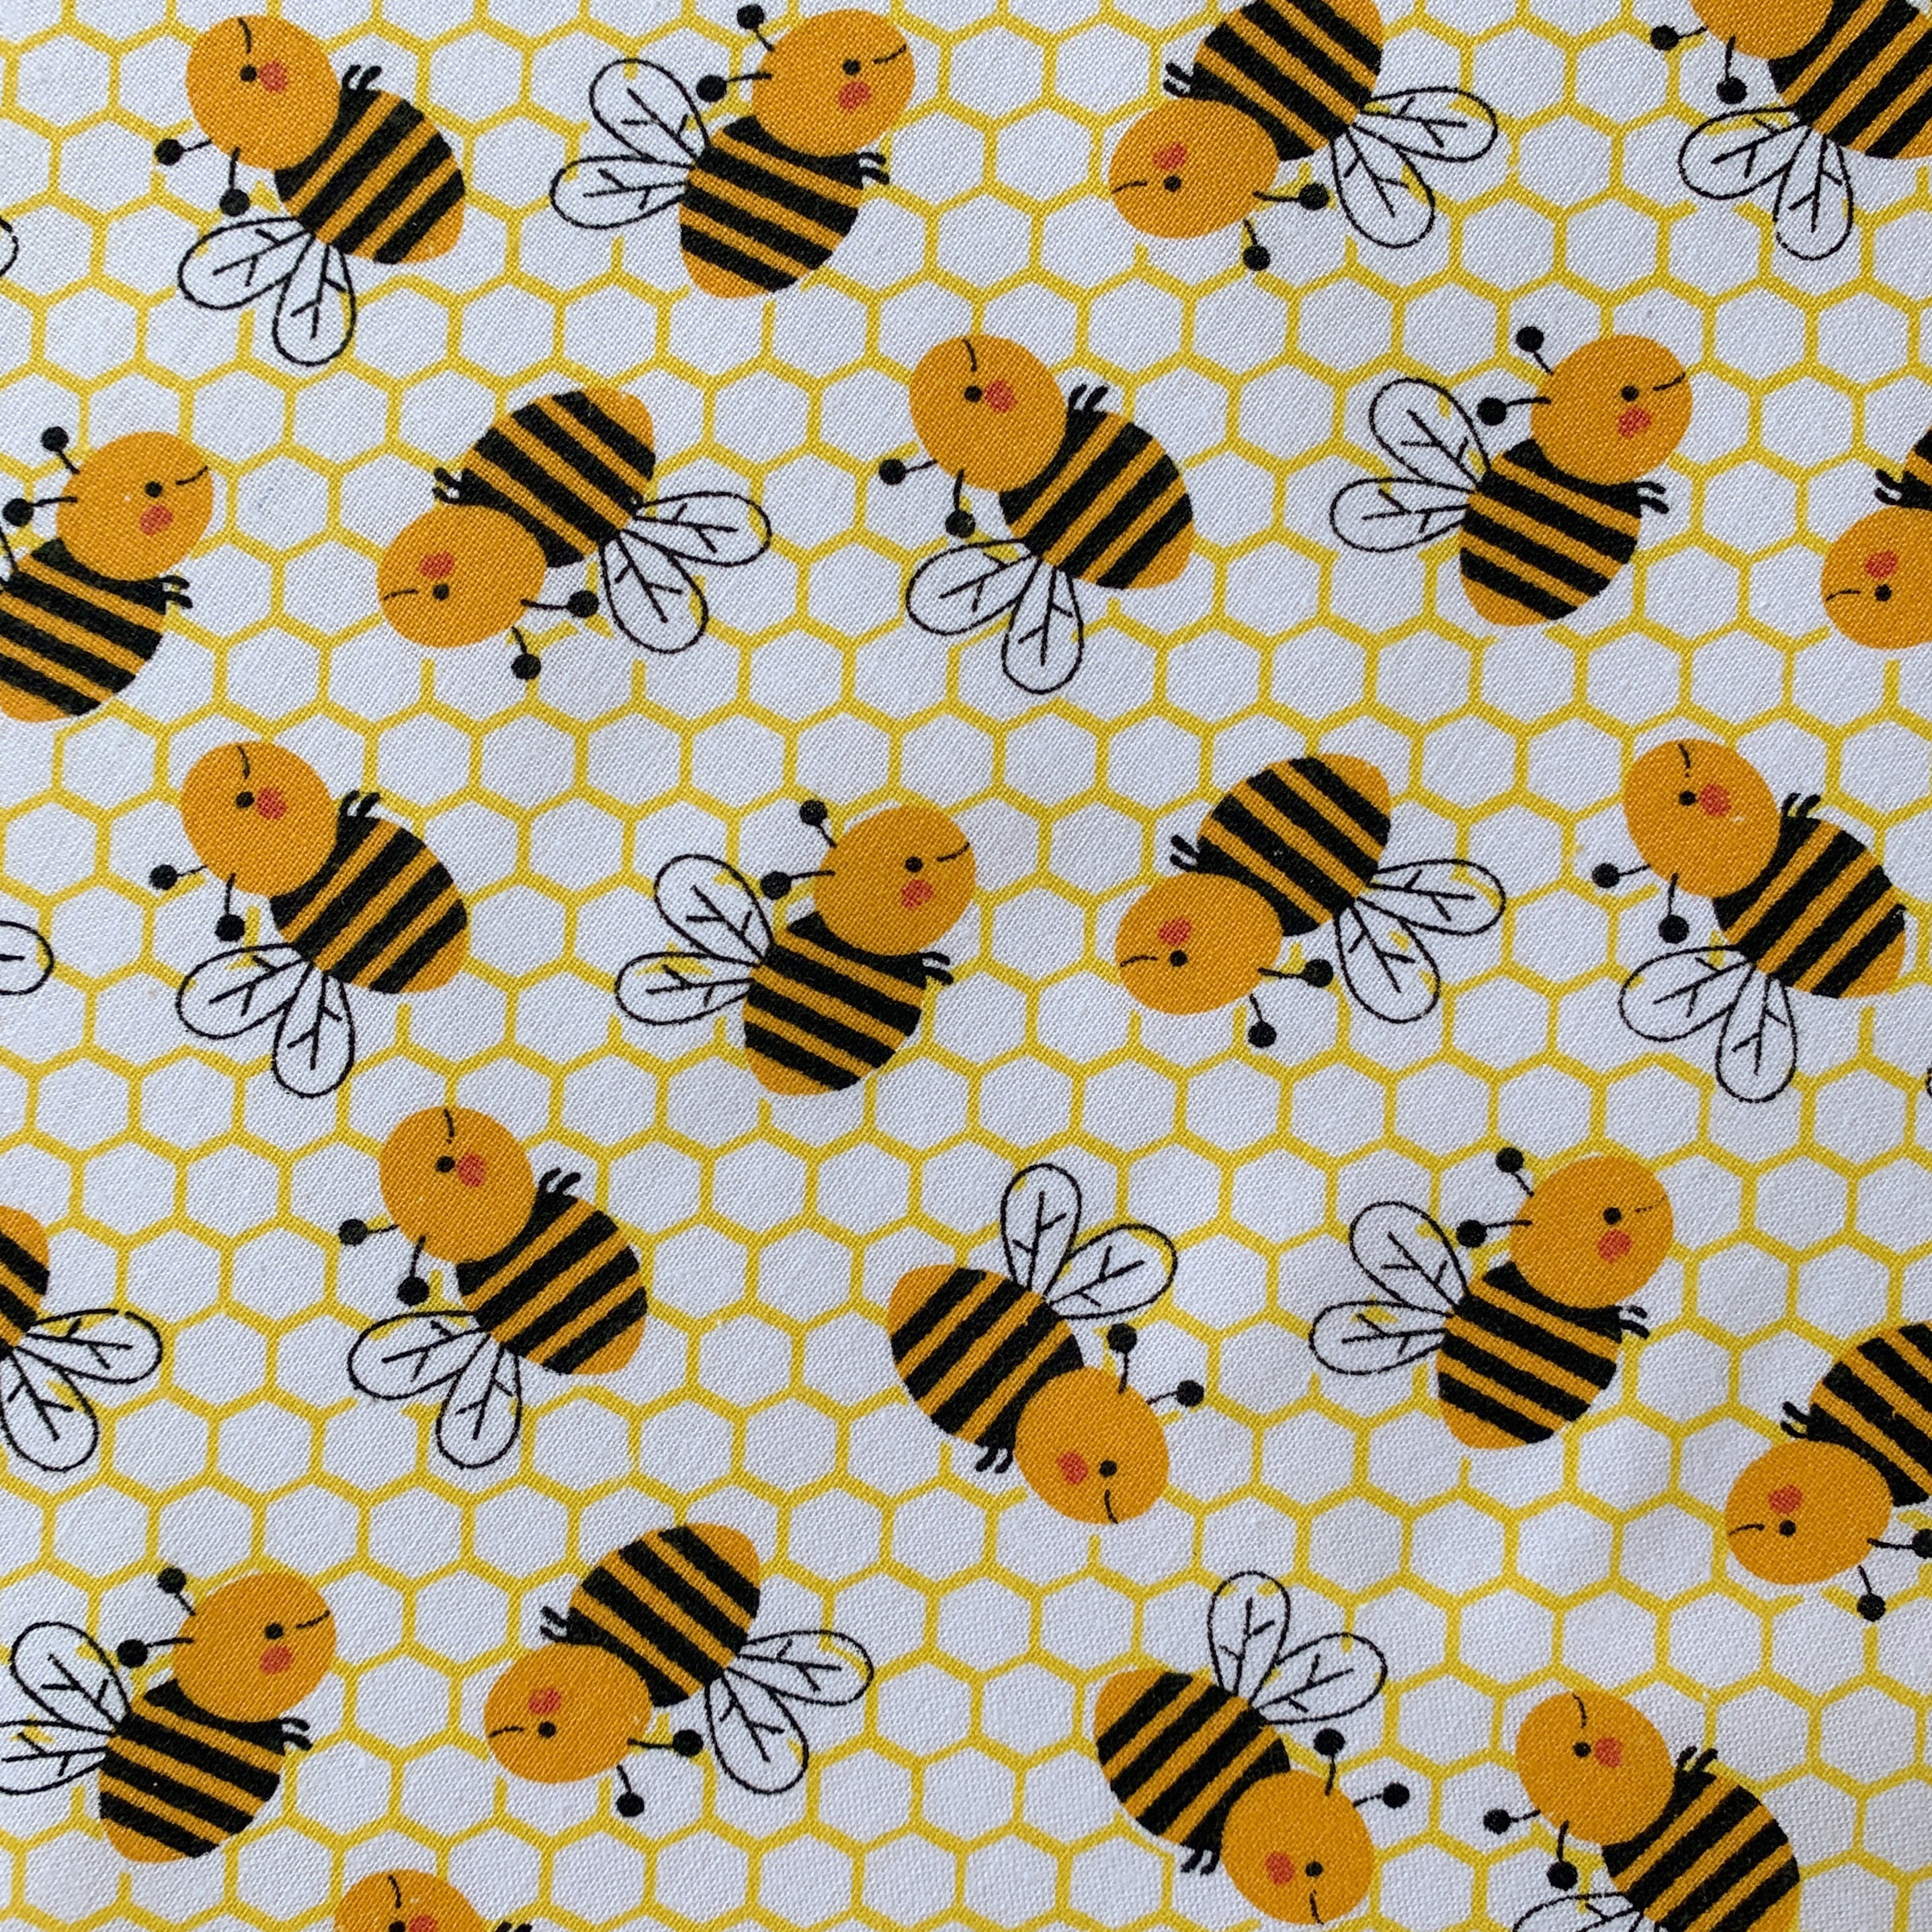 Bees and Honeycomb Fabric 100% Cotton, Honey Bee Fabric, Bumble Bee Cotton  Fabric by the Yard and Half Yard, Quilting Fabric Home Decor -  Denmark